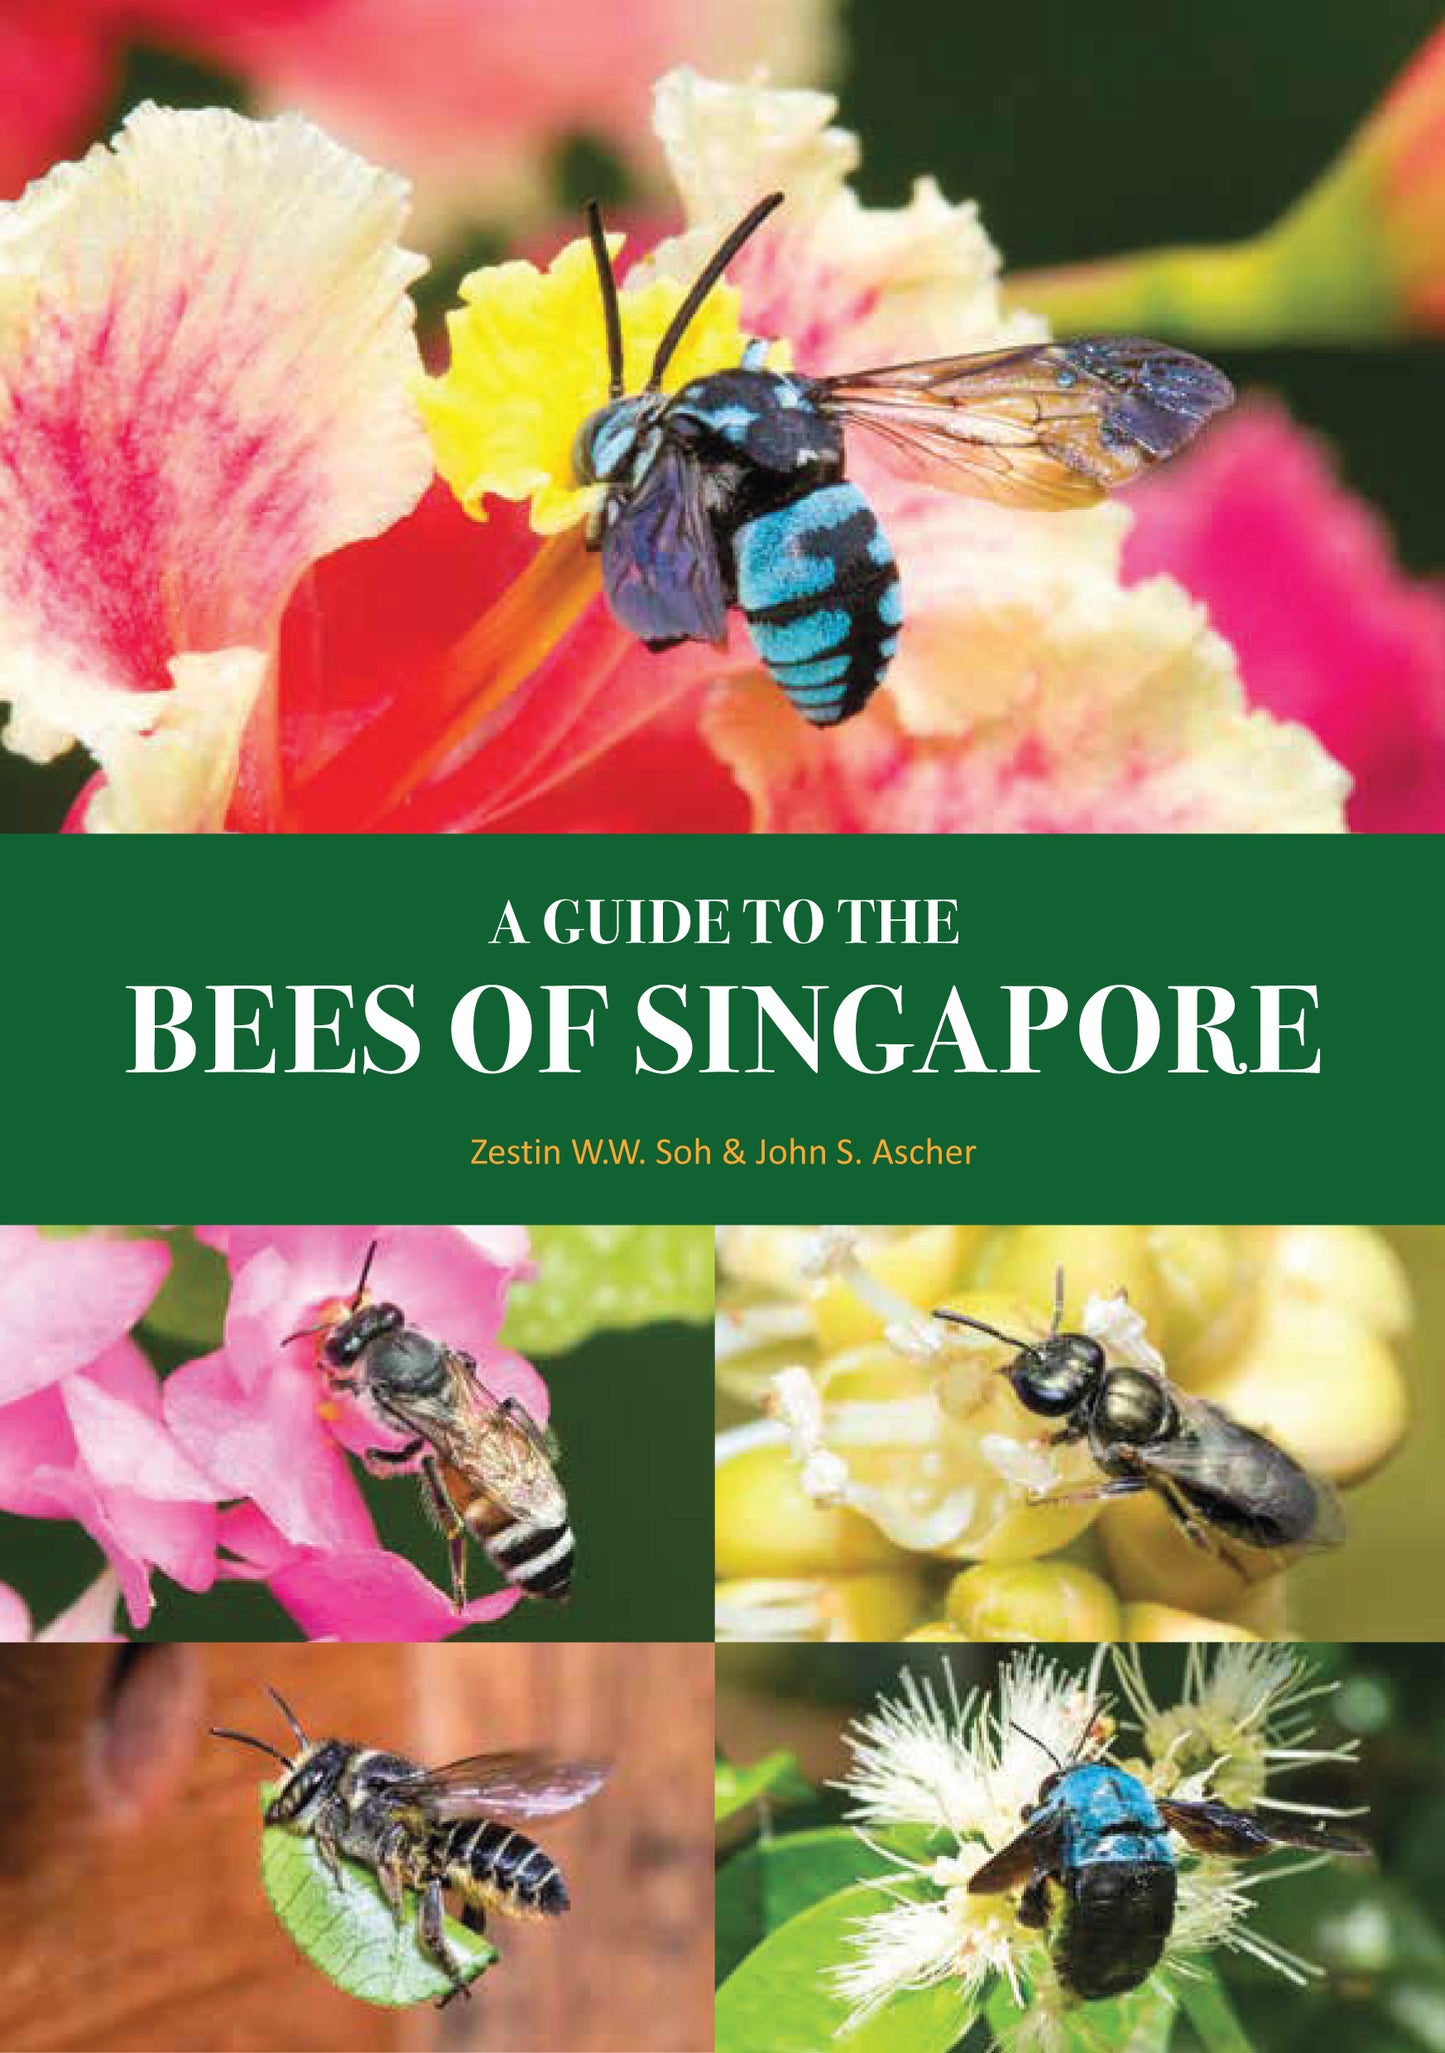 A Guide to the Bees of Singapore